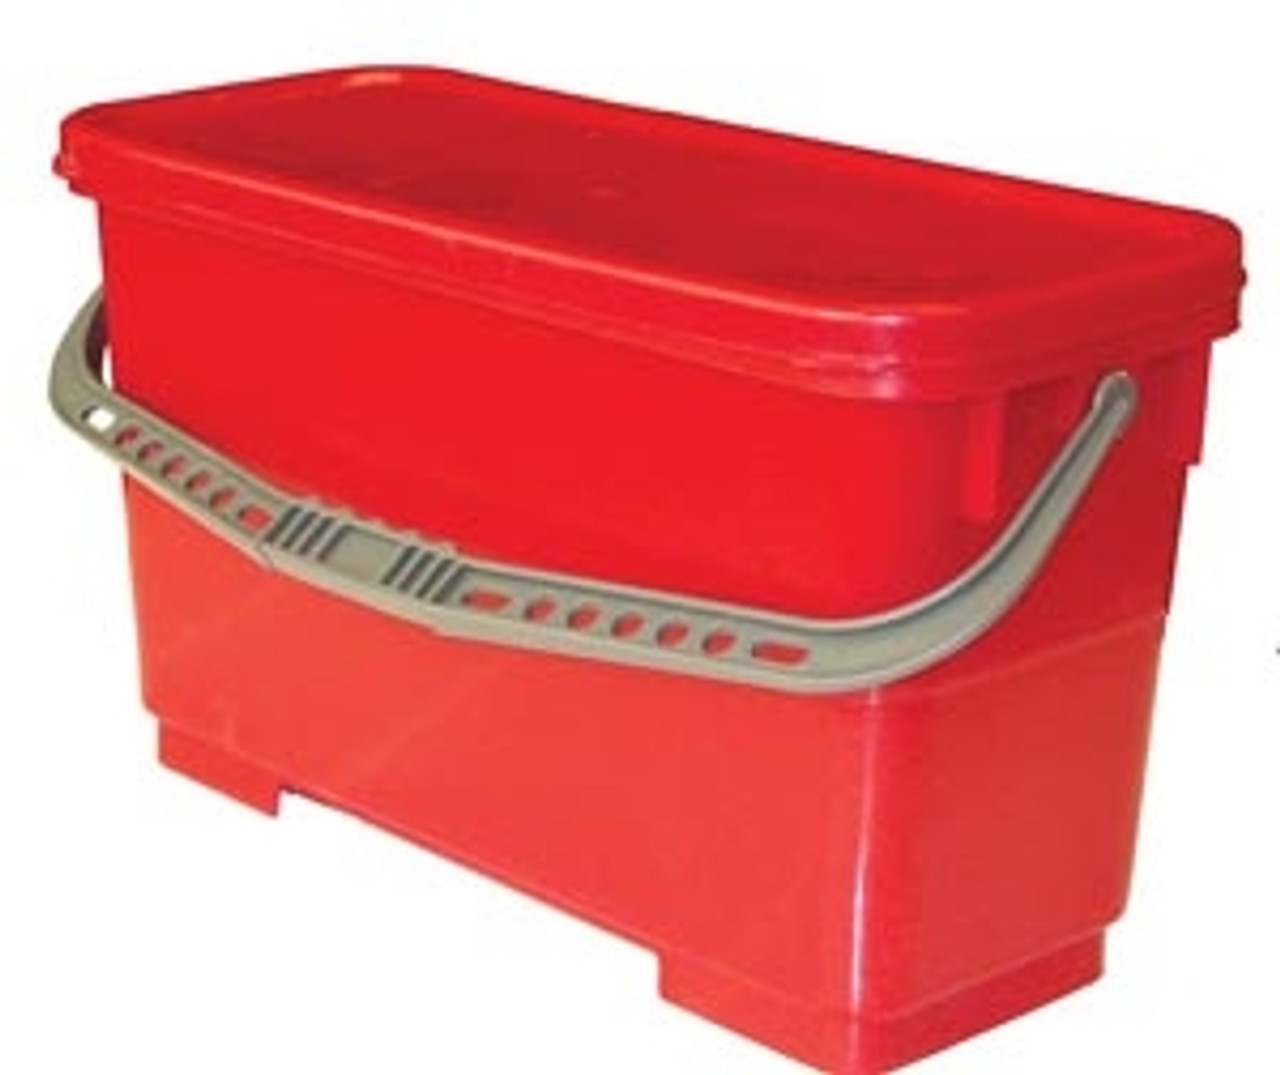 Charging Bucket With Leak Proof Lid 16 Quart Red (DROP SHIP ONLY from Golden Star Inc. - $100 minimum order for prepaid freight outside the Continental U.S. $50 dollar minimum order inside the Continental U.S.)